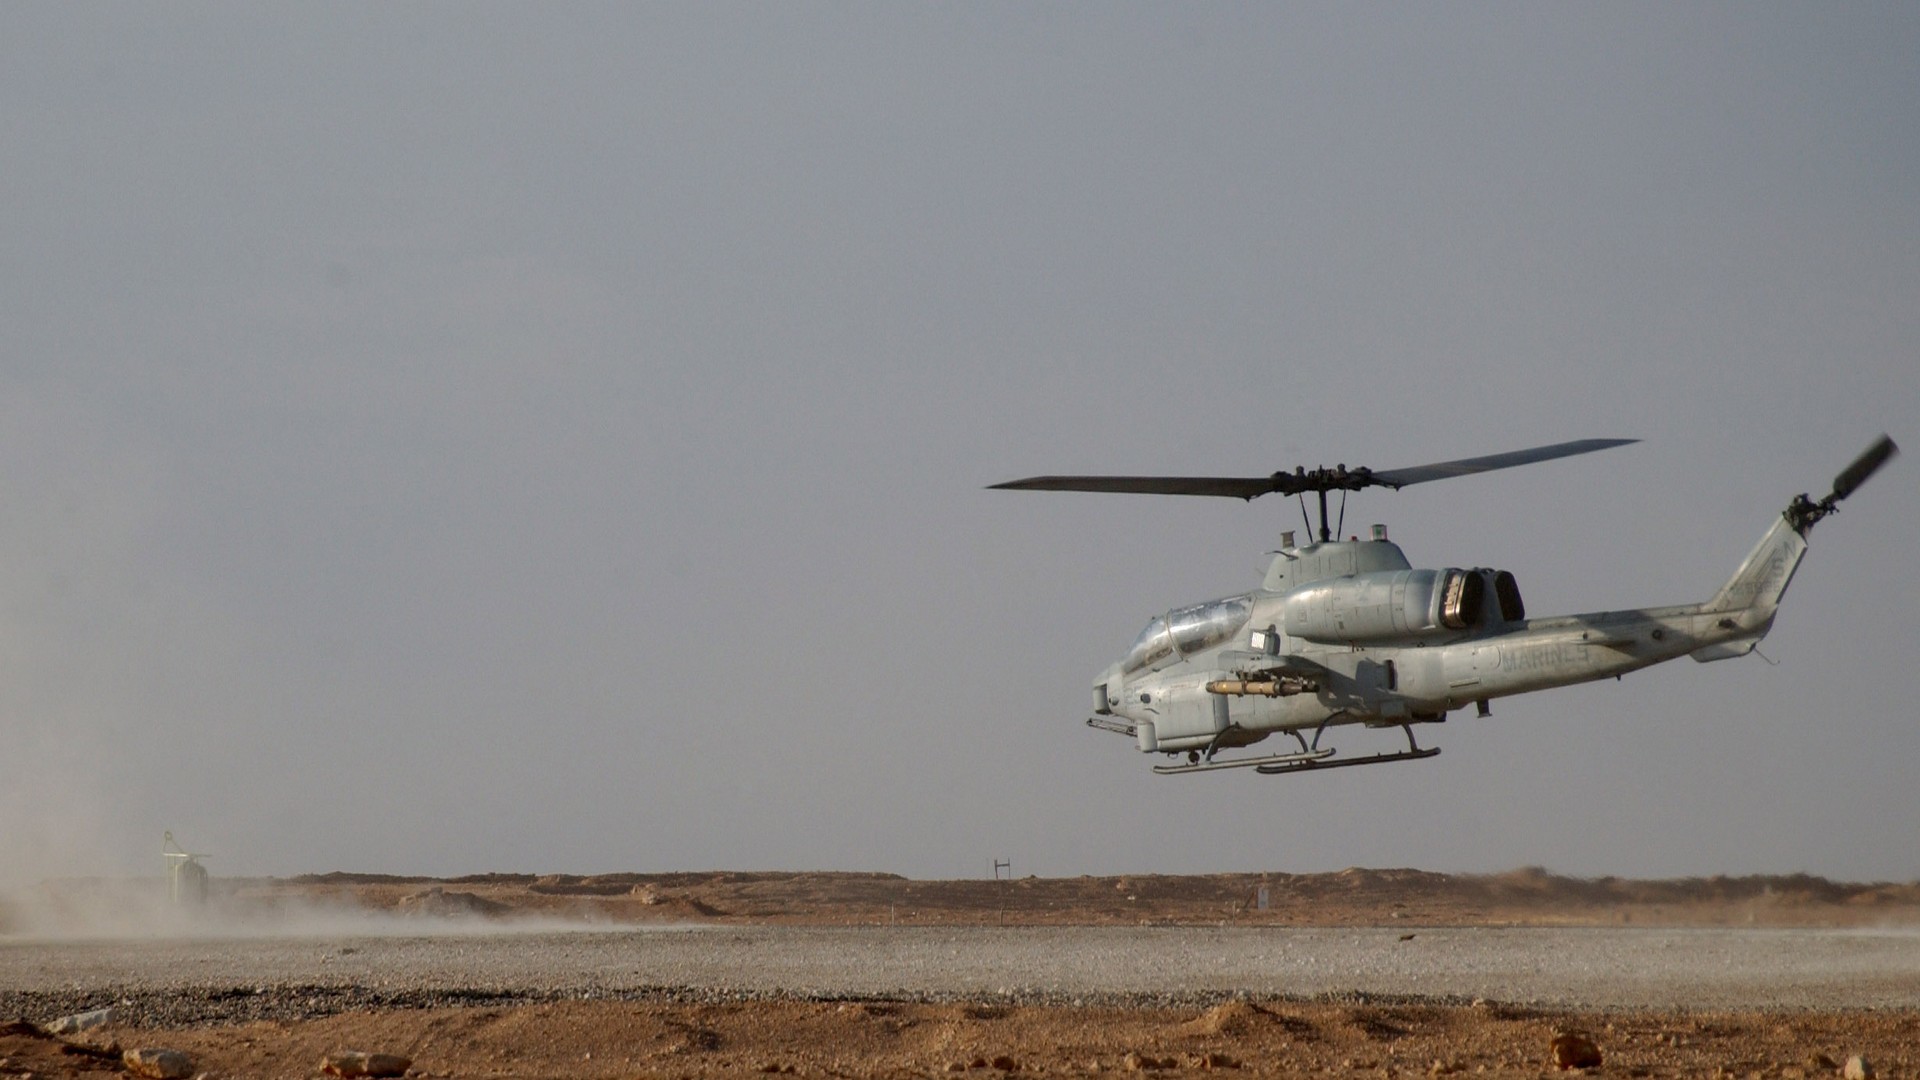 Combat Attack Helicopters AH-1W Super Cobra-005_cr.jpg